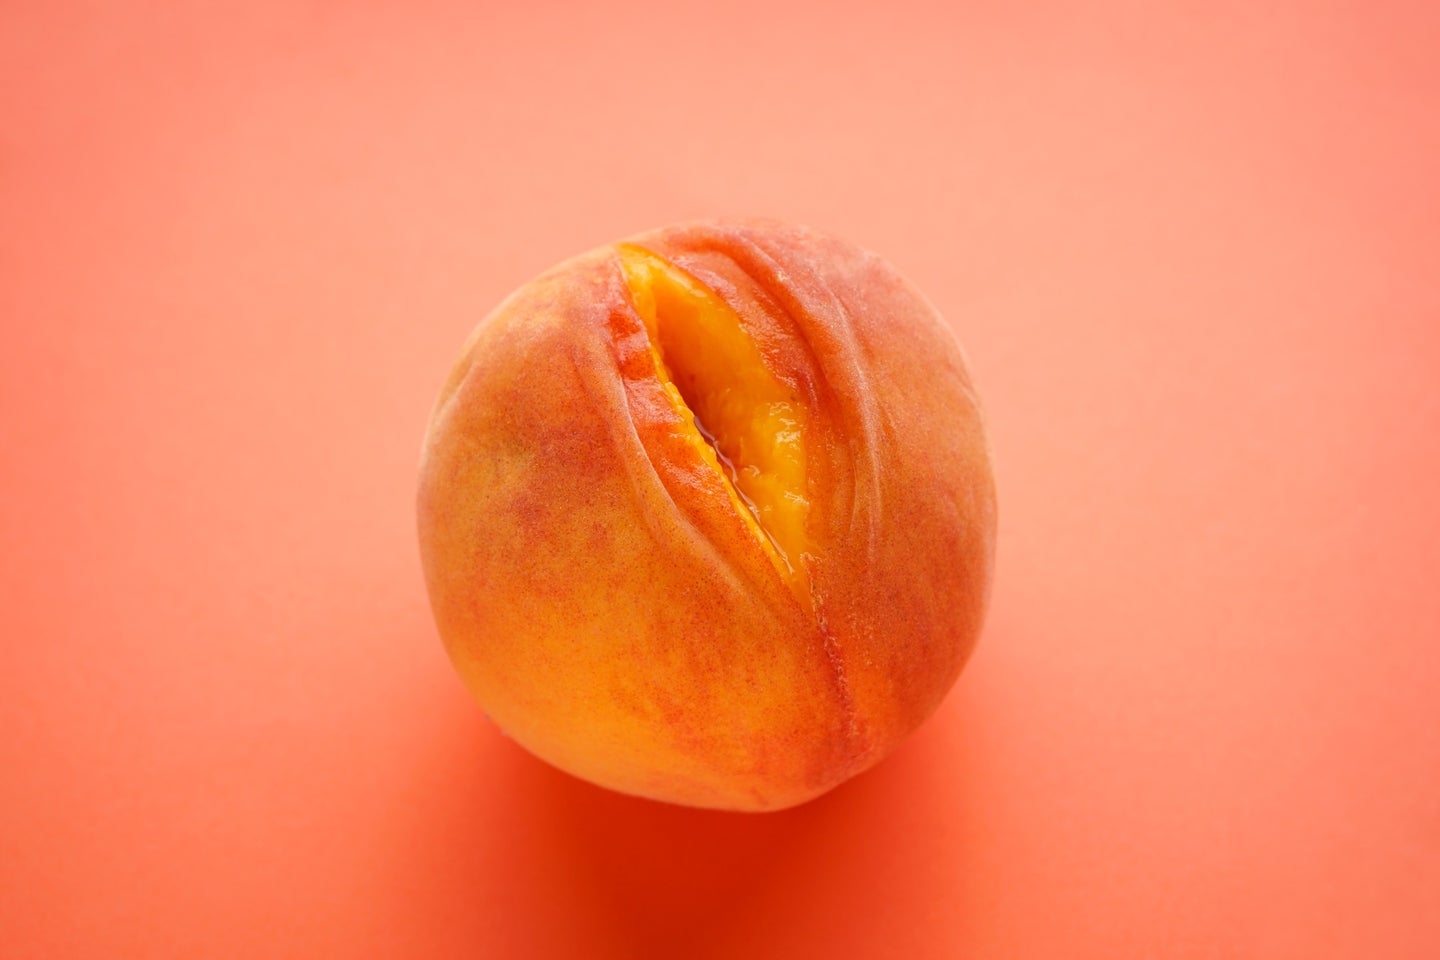 Juicy peach with slit to represent vabbing on an orange background